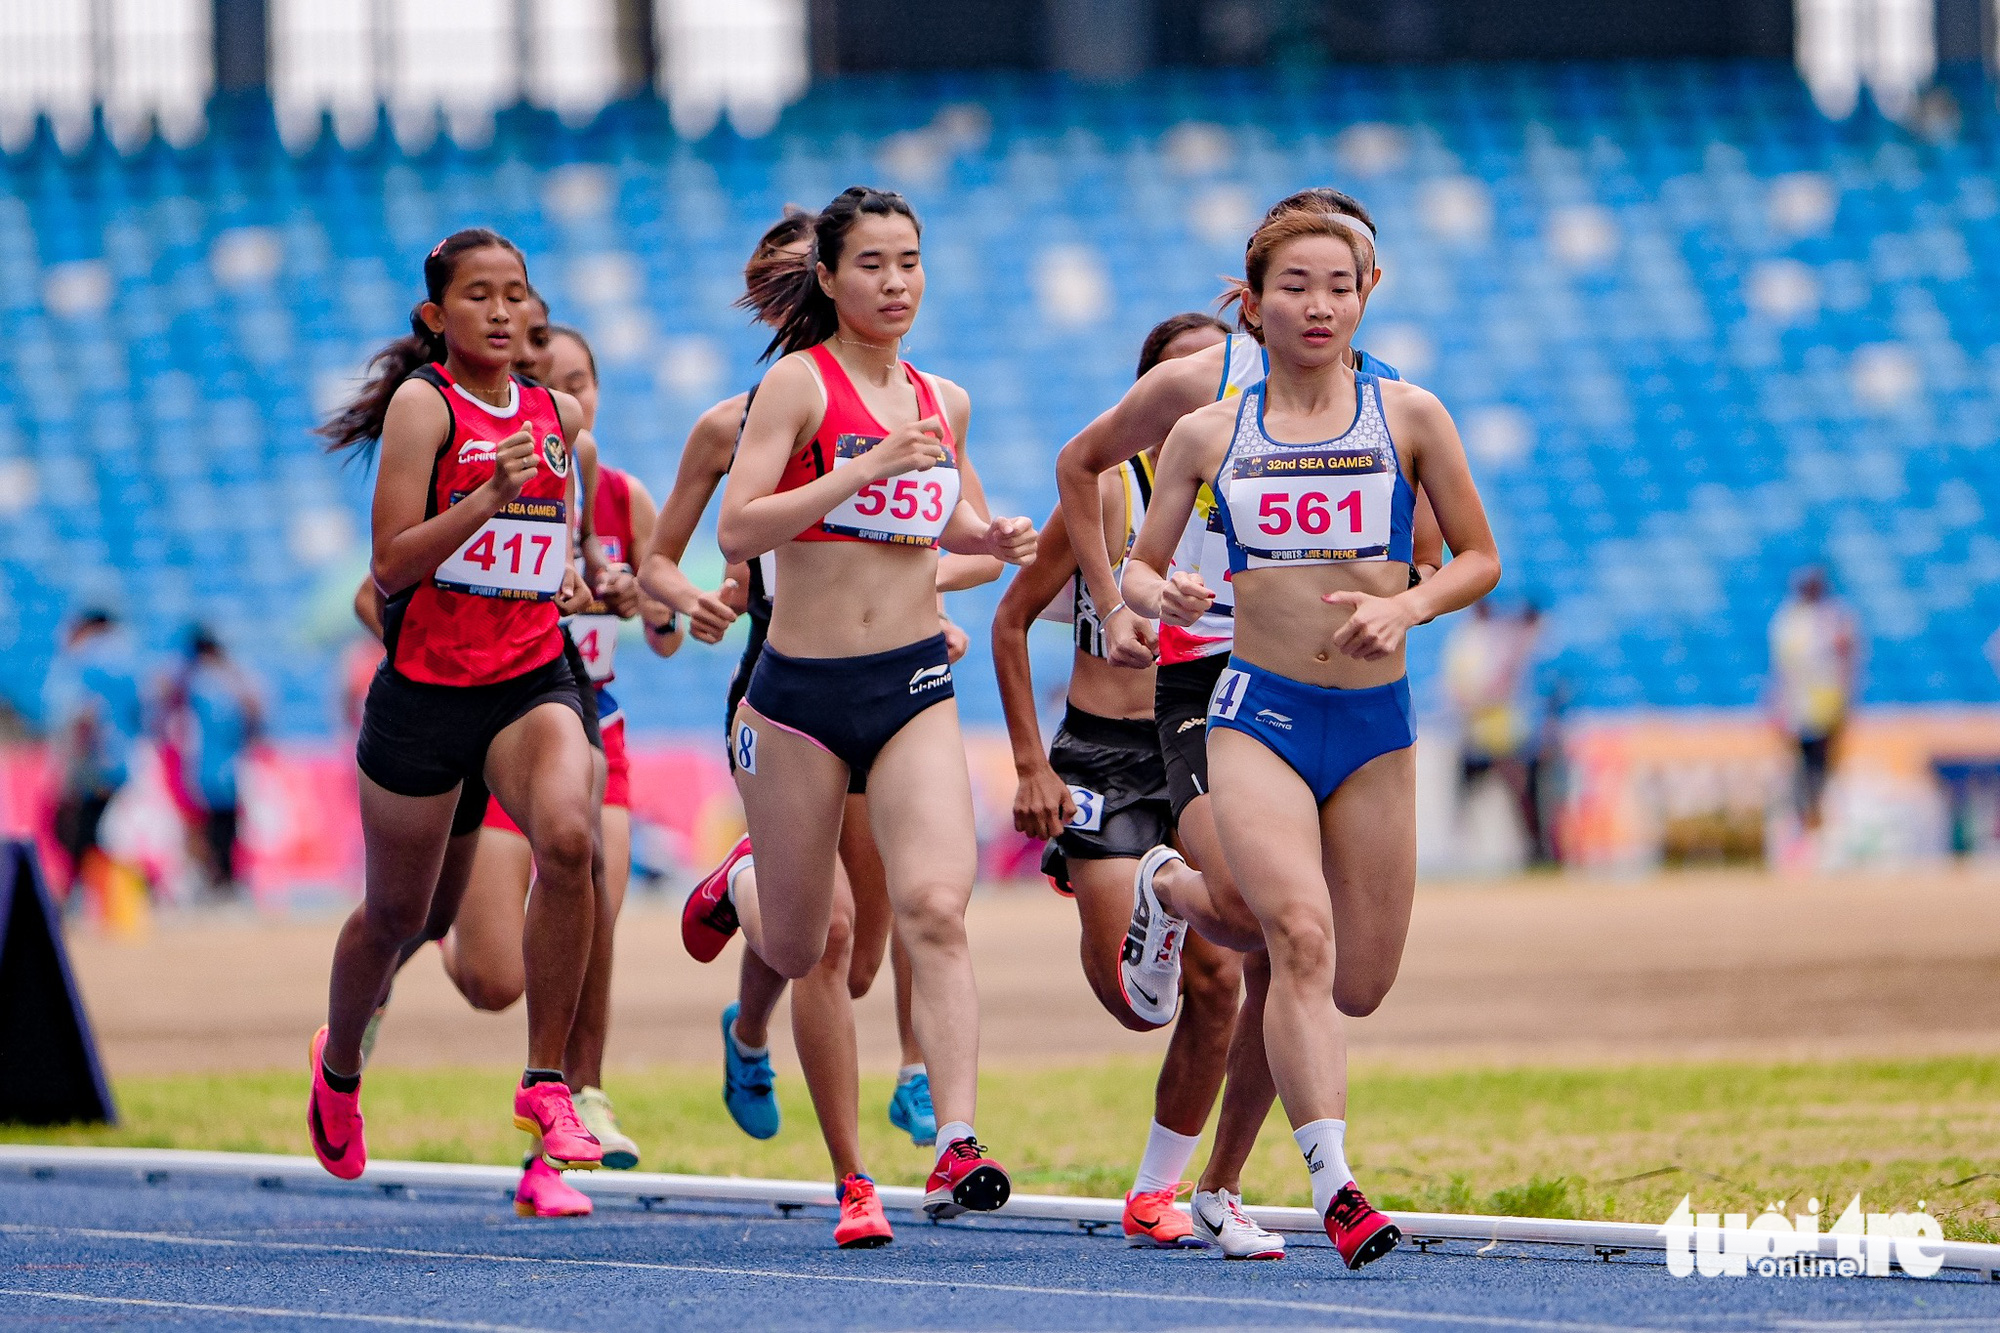 Vietnamese runner Nguyen Thi Oanh (No. 561) competes in women’s 1,500-meter run at the 2023 Southeast Asian Games in Cambodia, May 9, 2023. Photo: Nam Tran / Tuoi Tre